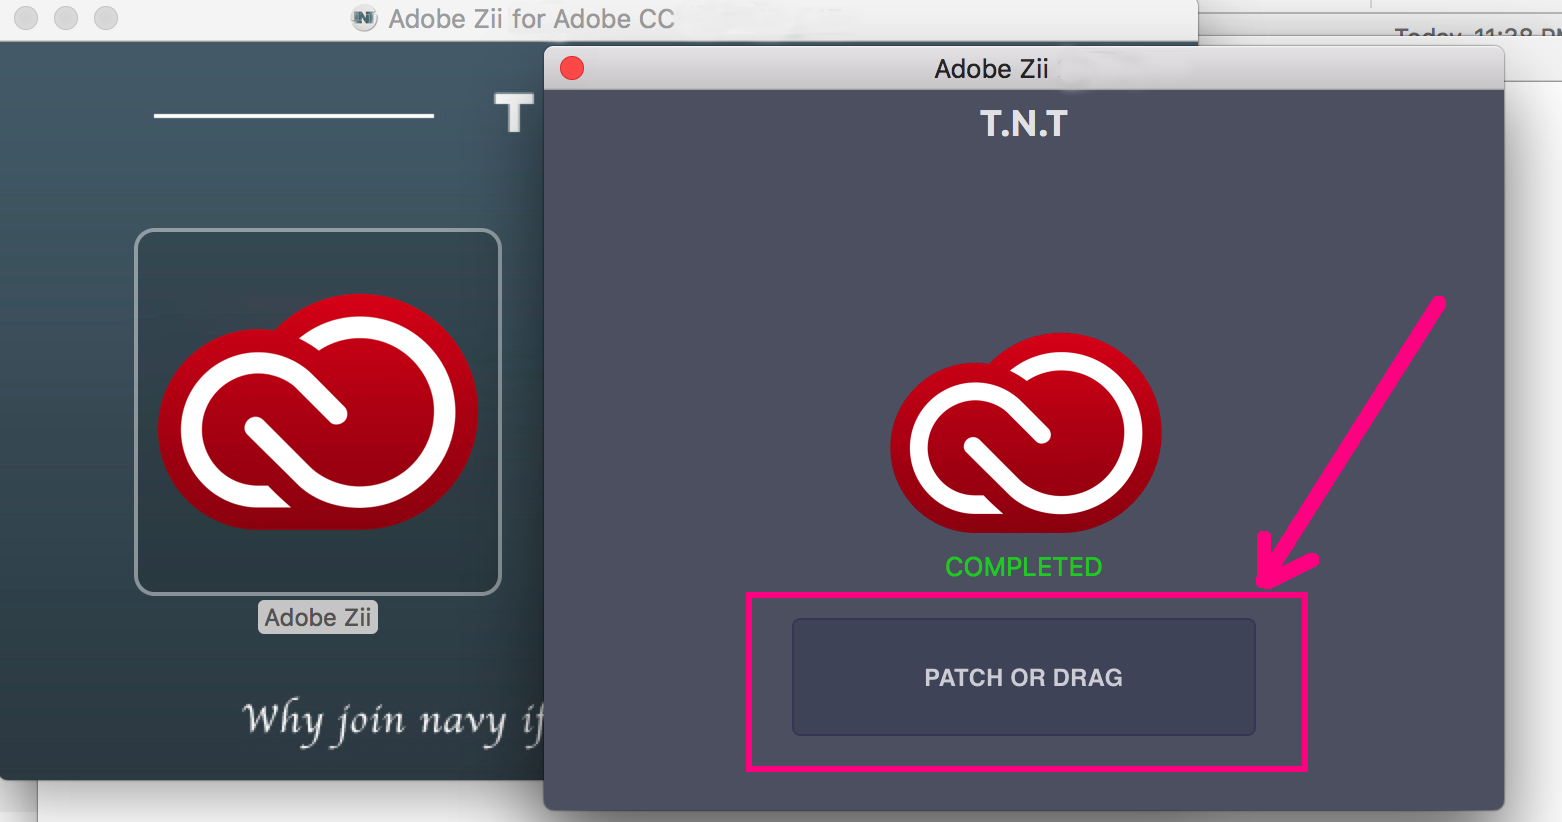 Adobe Zii Patcher 4.5.0 – Get All Adobe CC Activated for FREE | Adobe Software